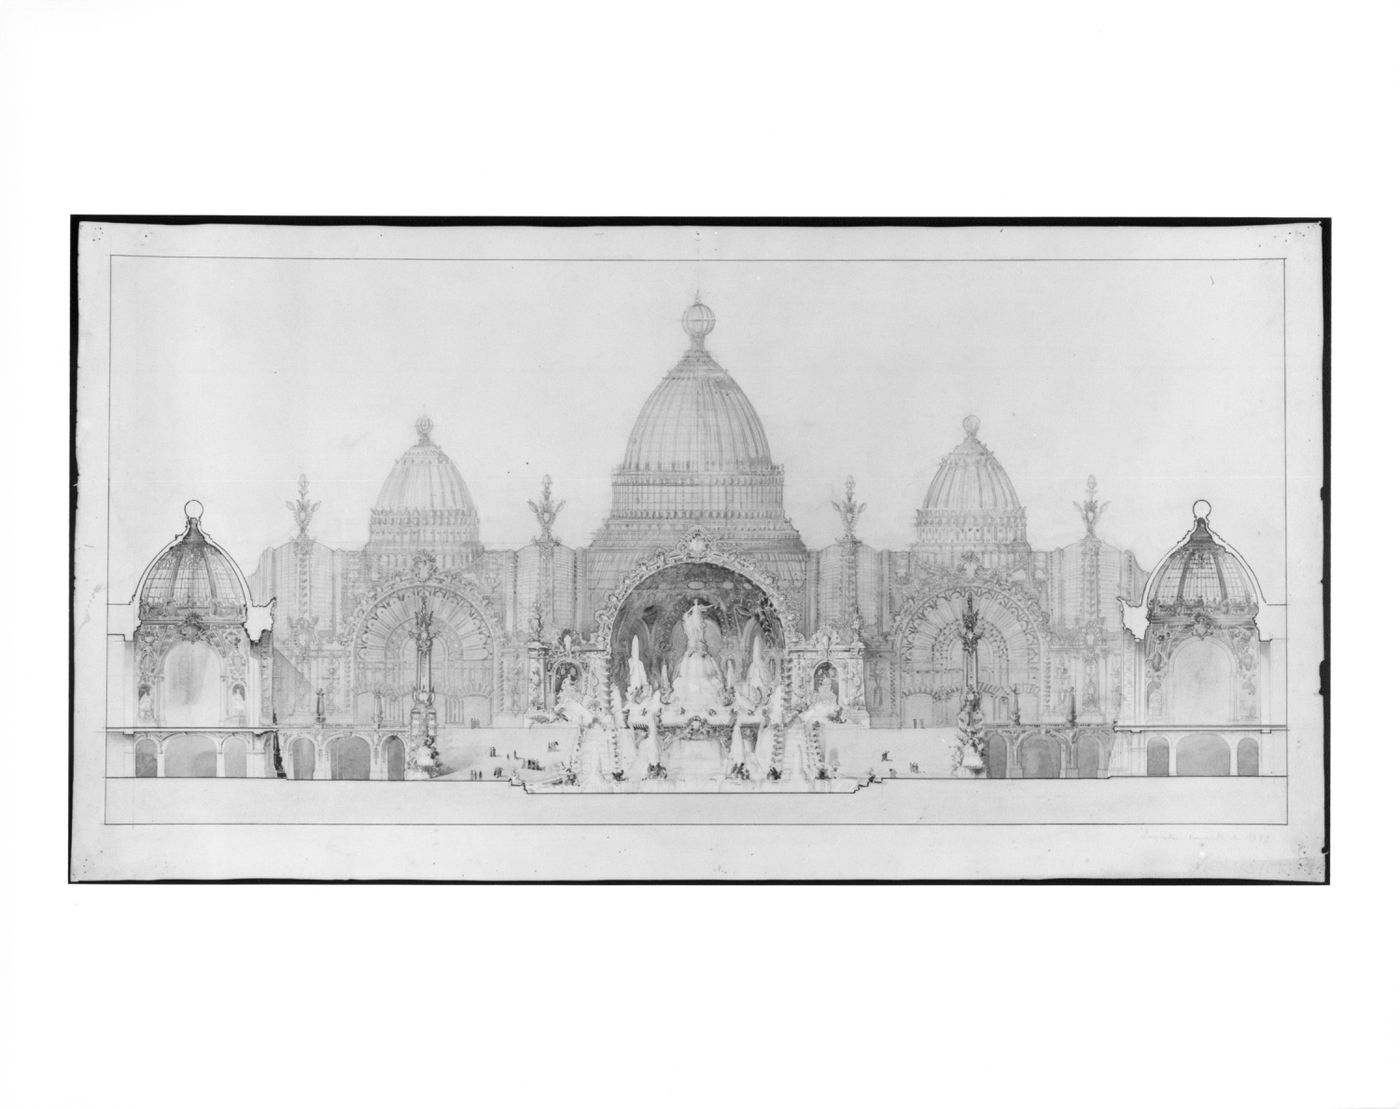 Project for the Chateau d'eau, Exposition Universelle, 1900